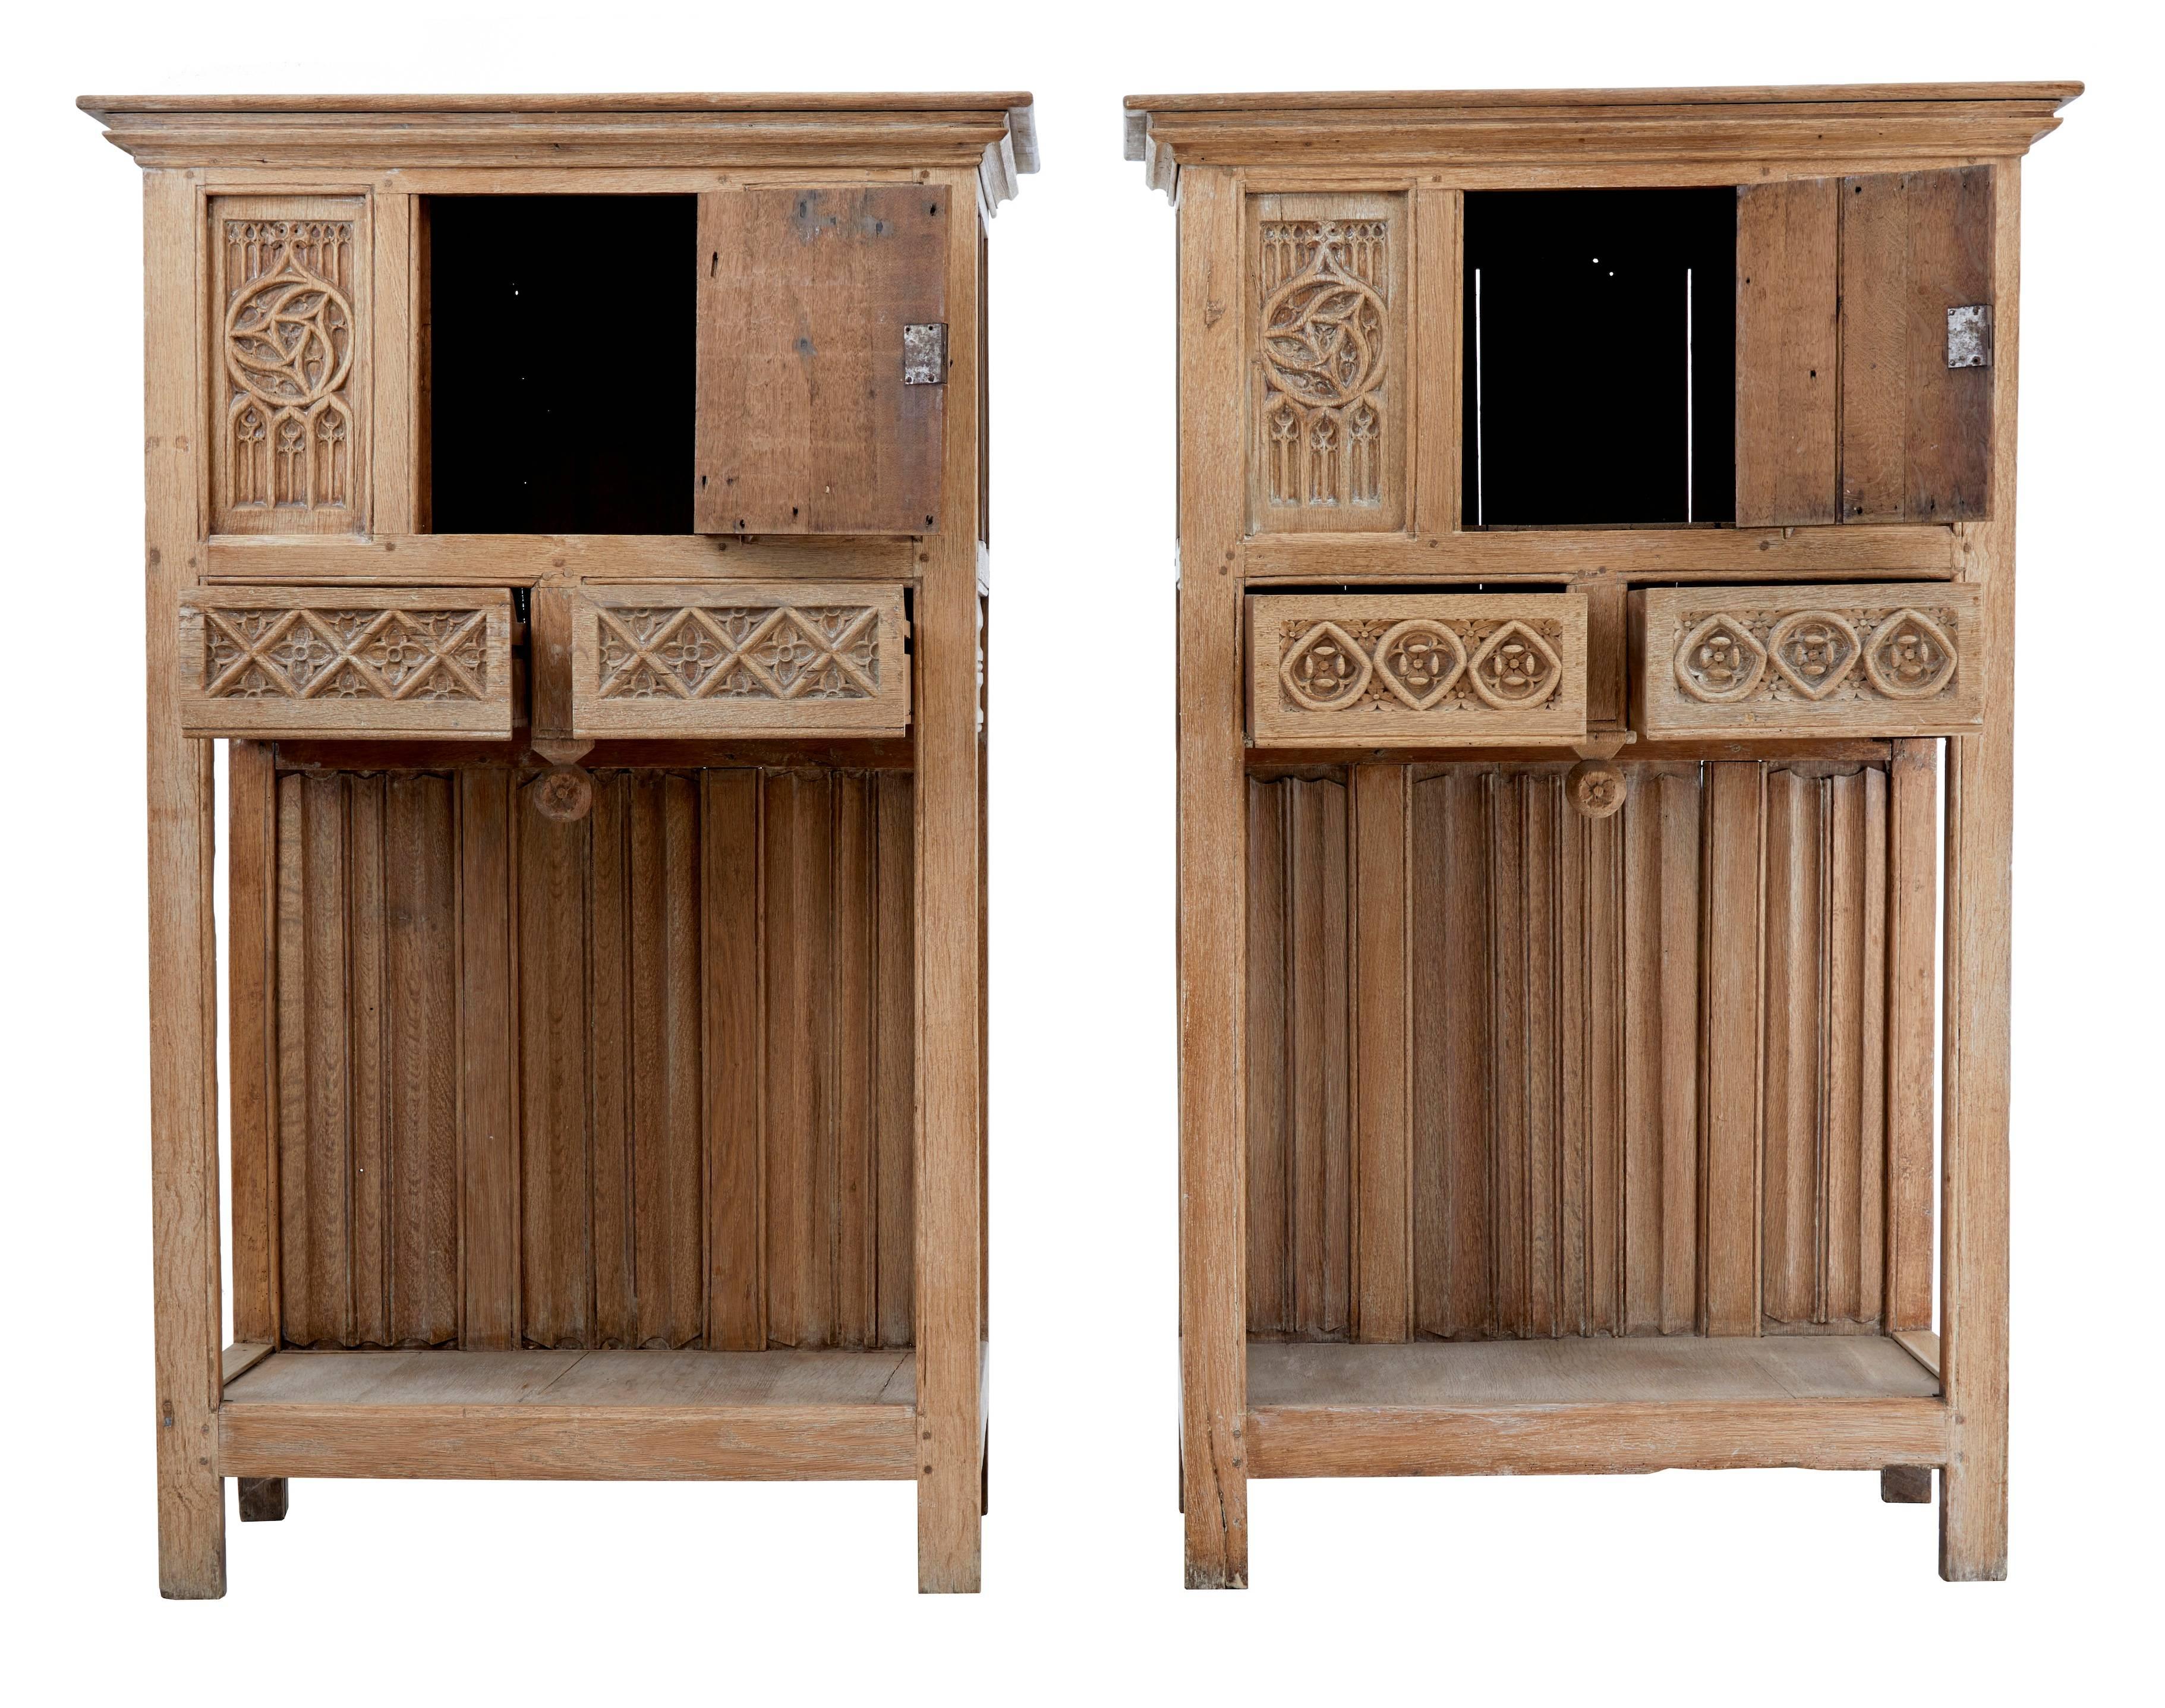 Rare pair of Victorian Gothic Revival cabinets, circa 1880.
Now stripped to a bare oak color.
Beautifully carved tracery panels. Single door opens for cupboard space, below which are two drawers.
Linen fold carved oak back panels provide the back